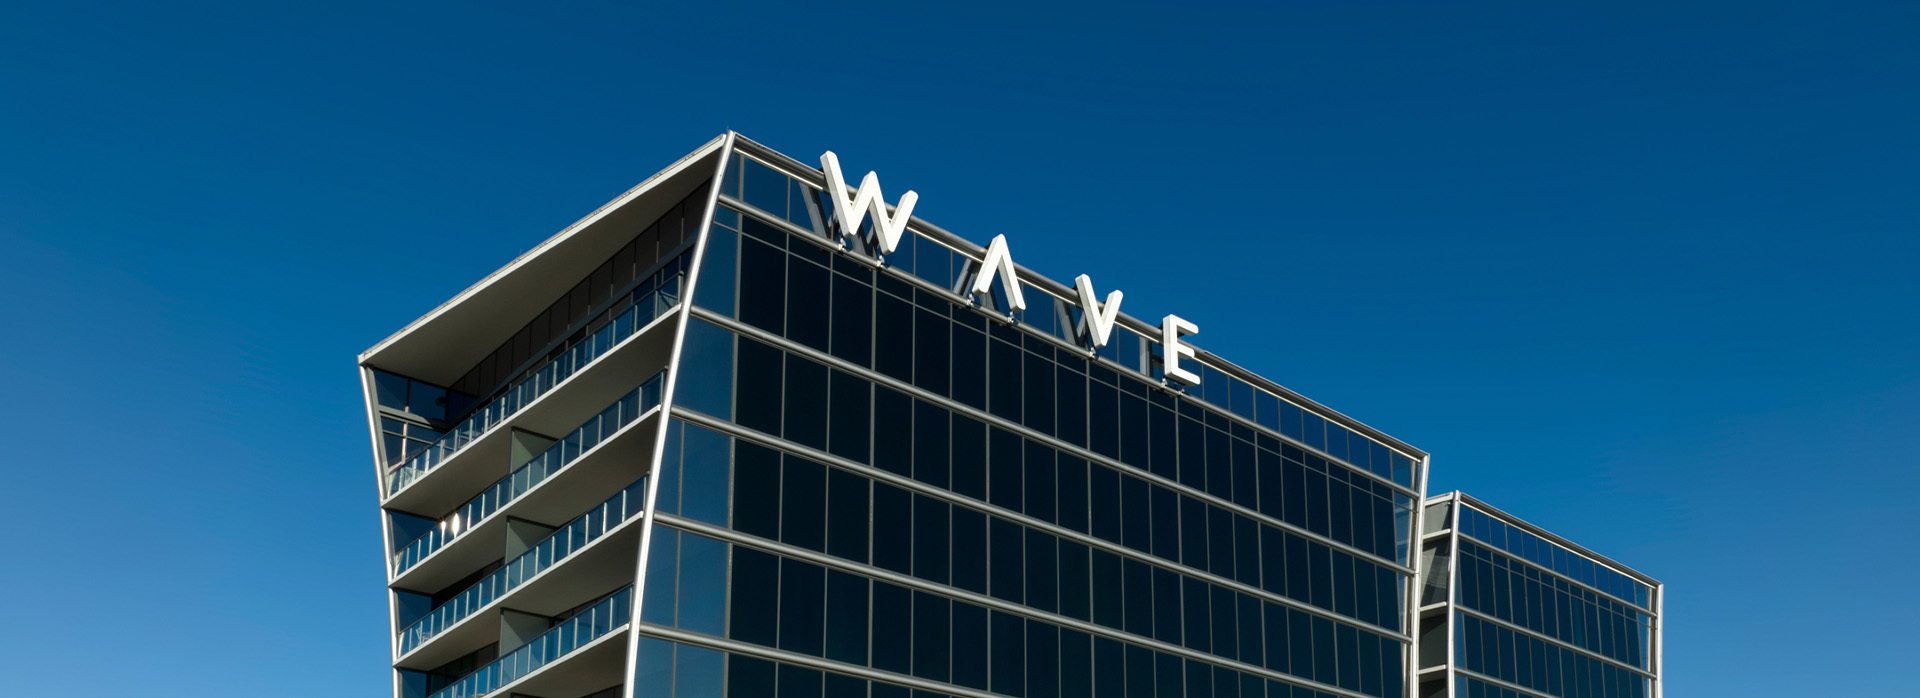 exterior of wave hotel sign